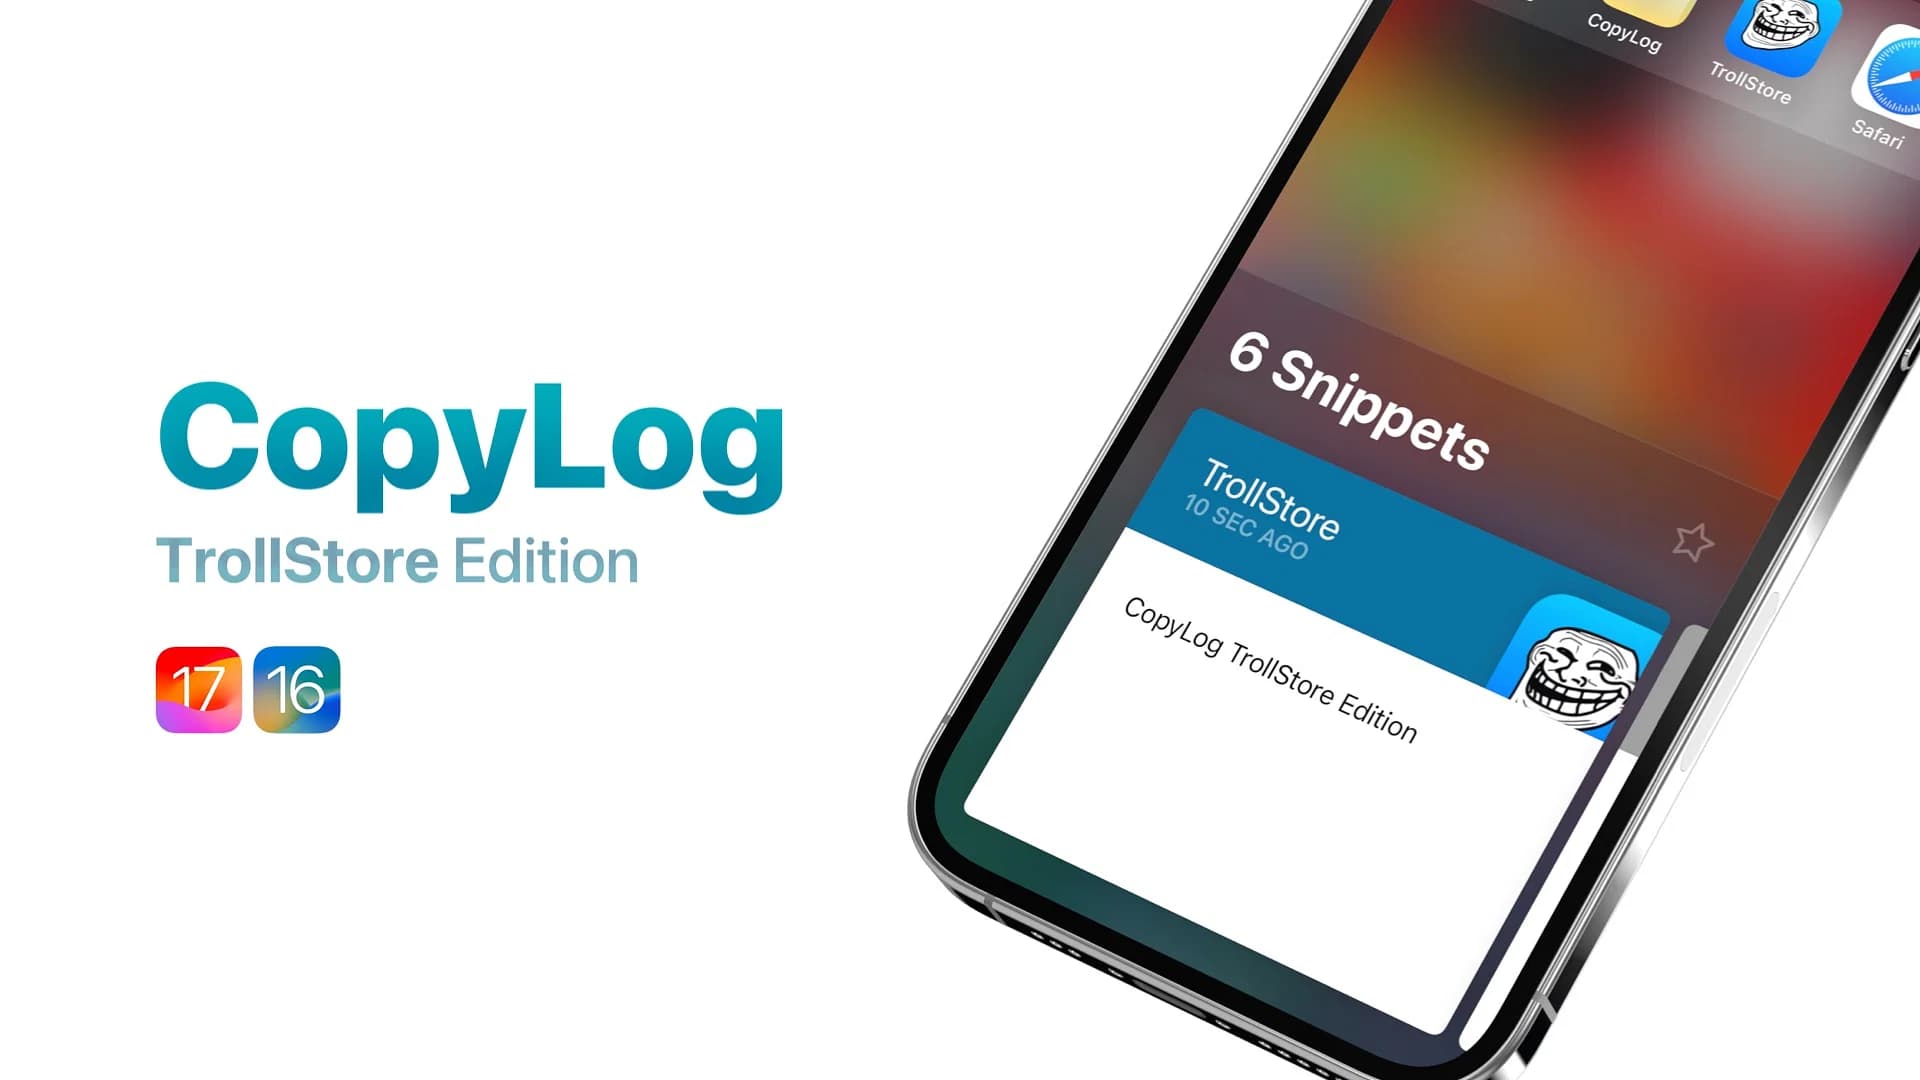 CopyLog for TrollStore brings powerful new clipboard management capabilities to non-jailbroken devices